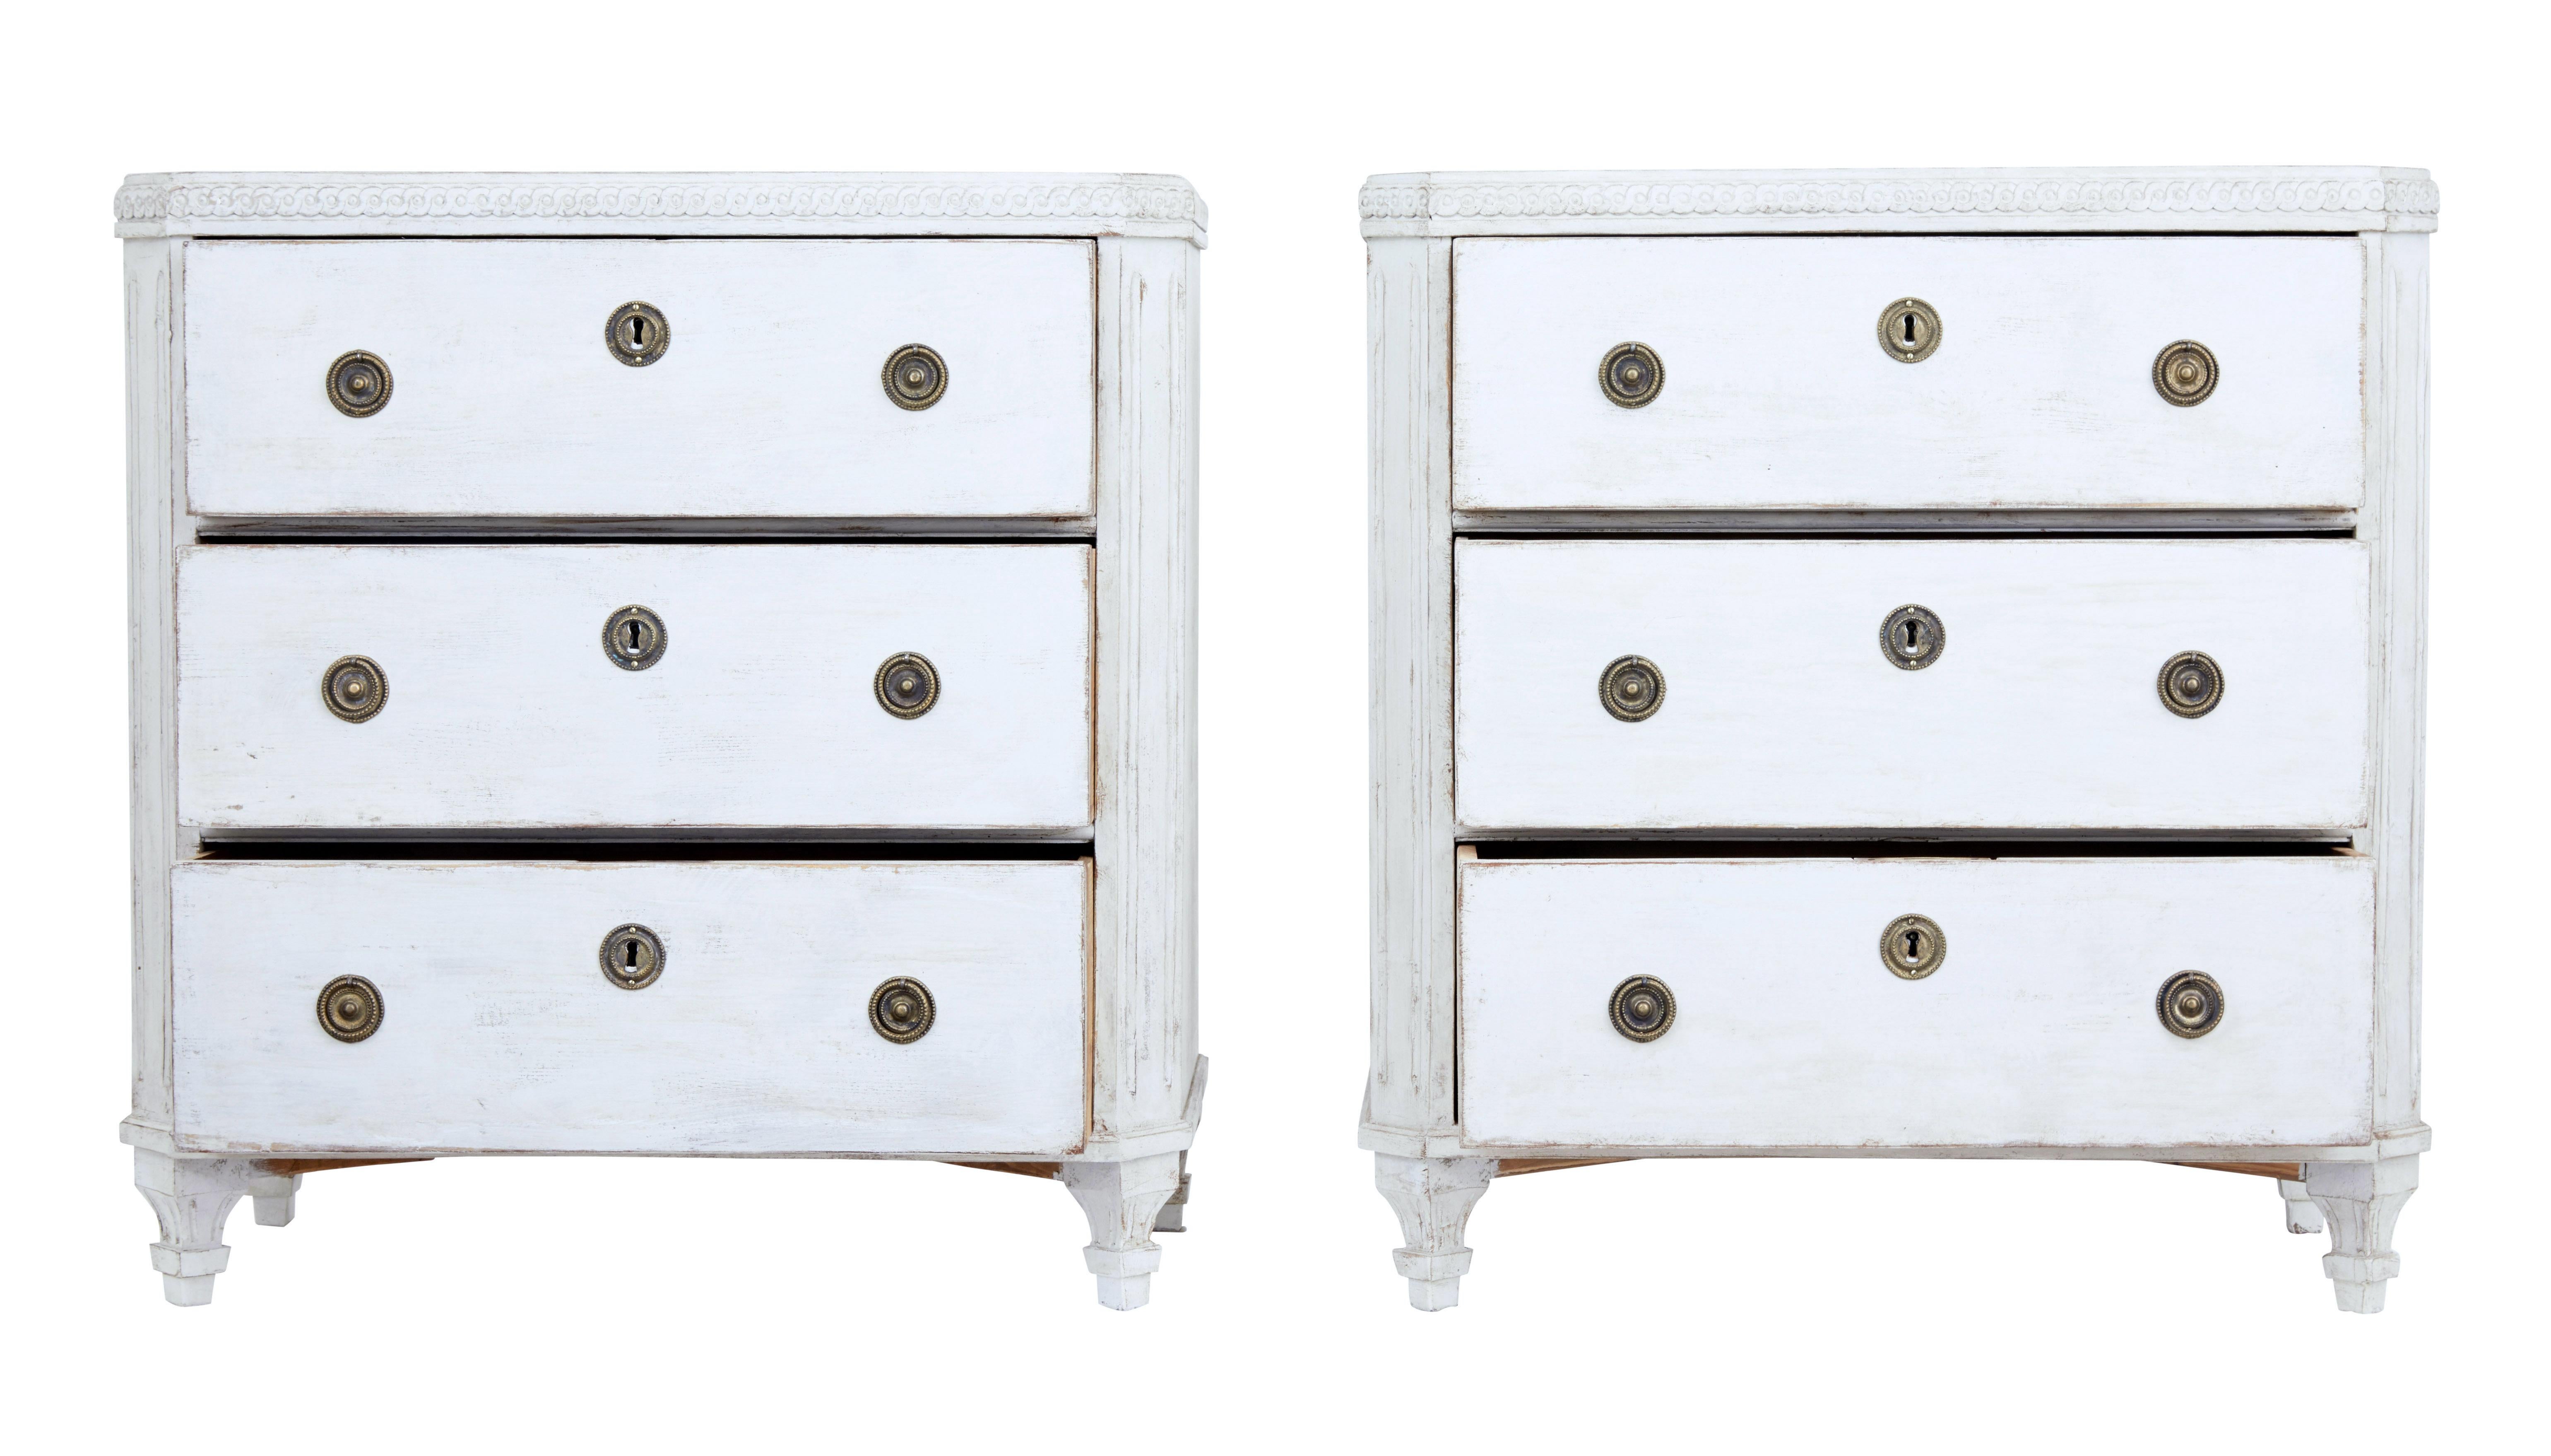 Pair of painted Swedish commodes, circa 1880.

Carved scrolling detail the top surface. Canted corners with fluted detail. 3 drawers with brass ring handles and escutcheons.

Standing on detailed tapered legs.

Later paint and hardware,